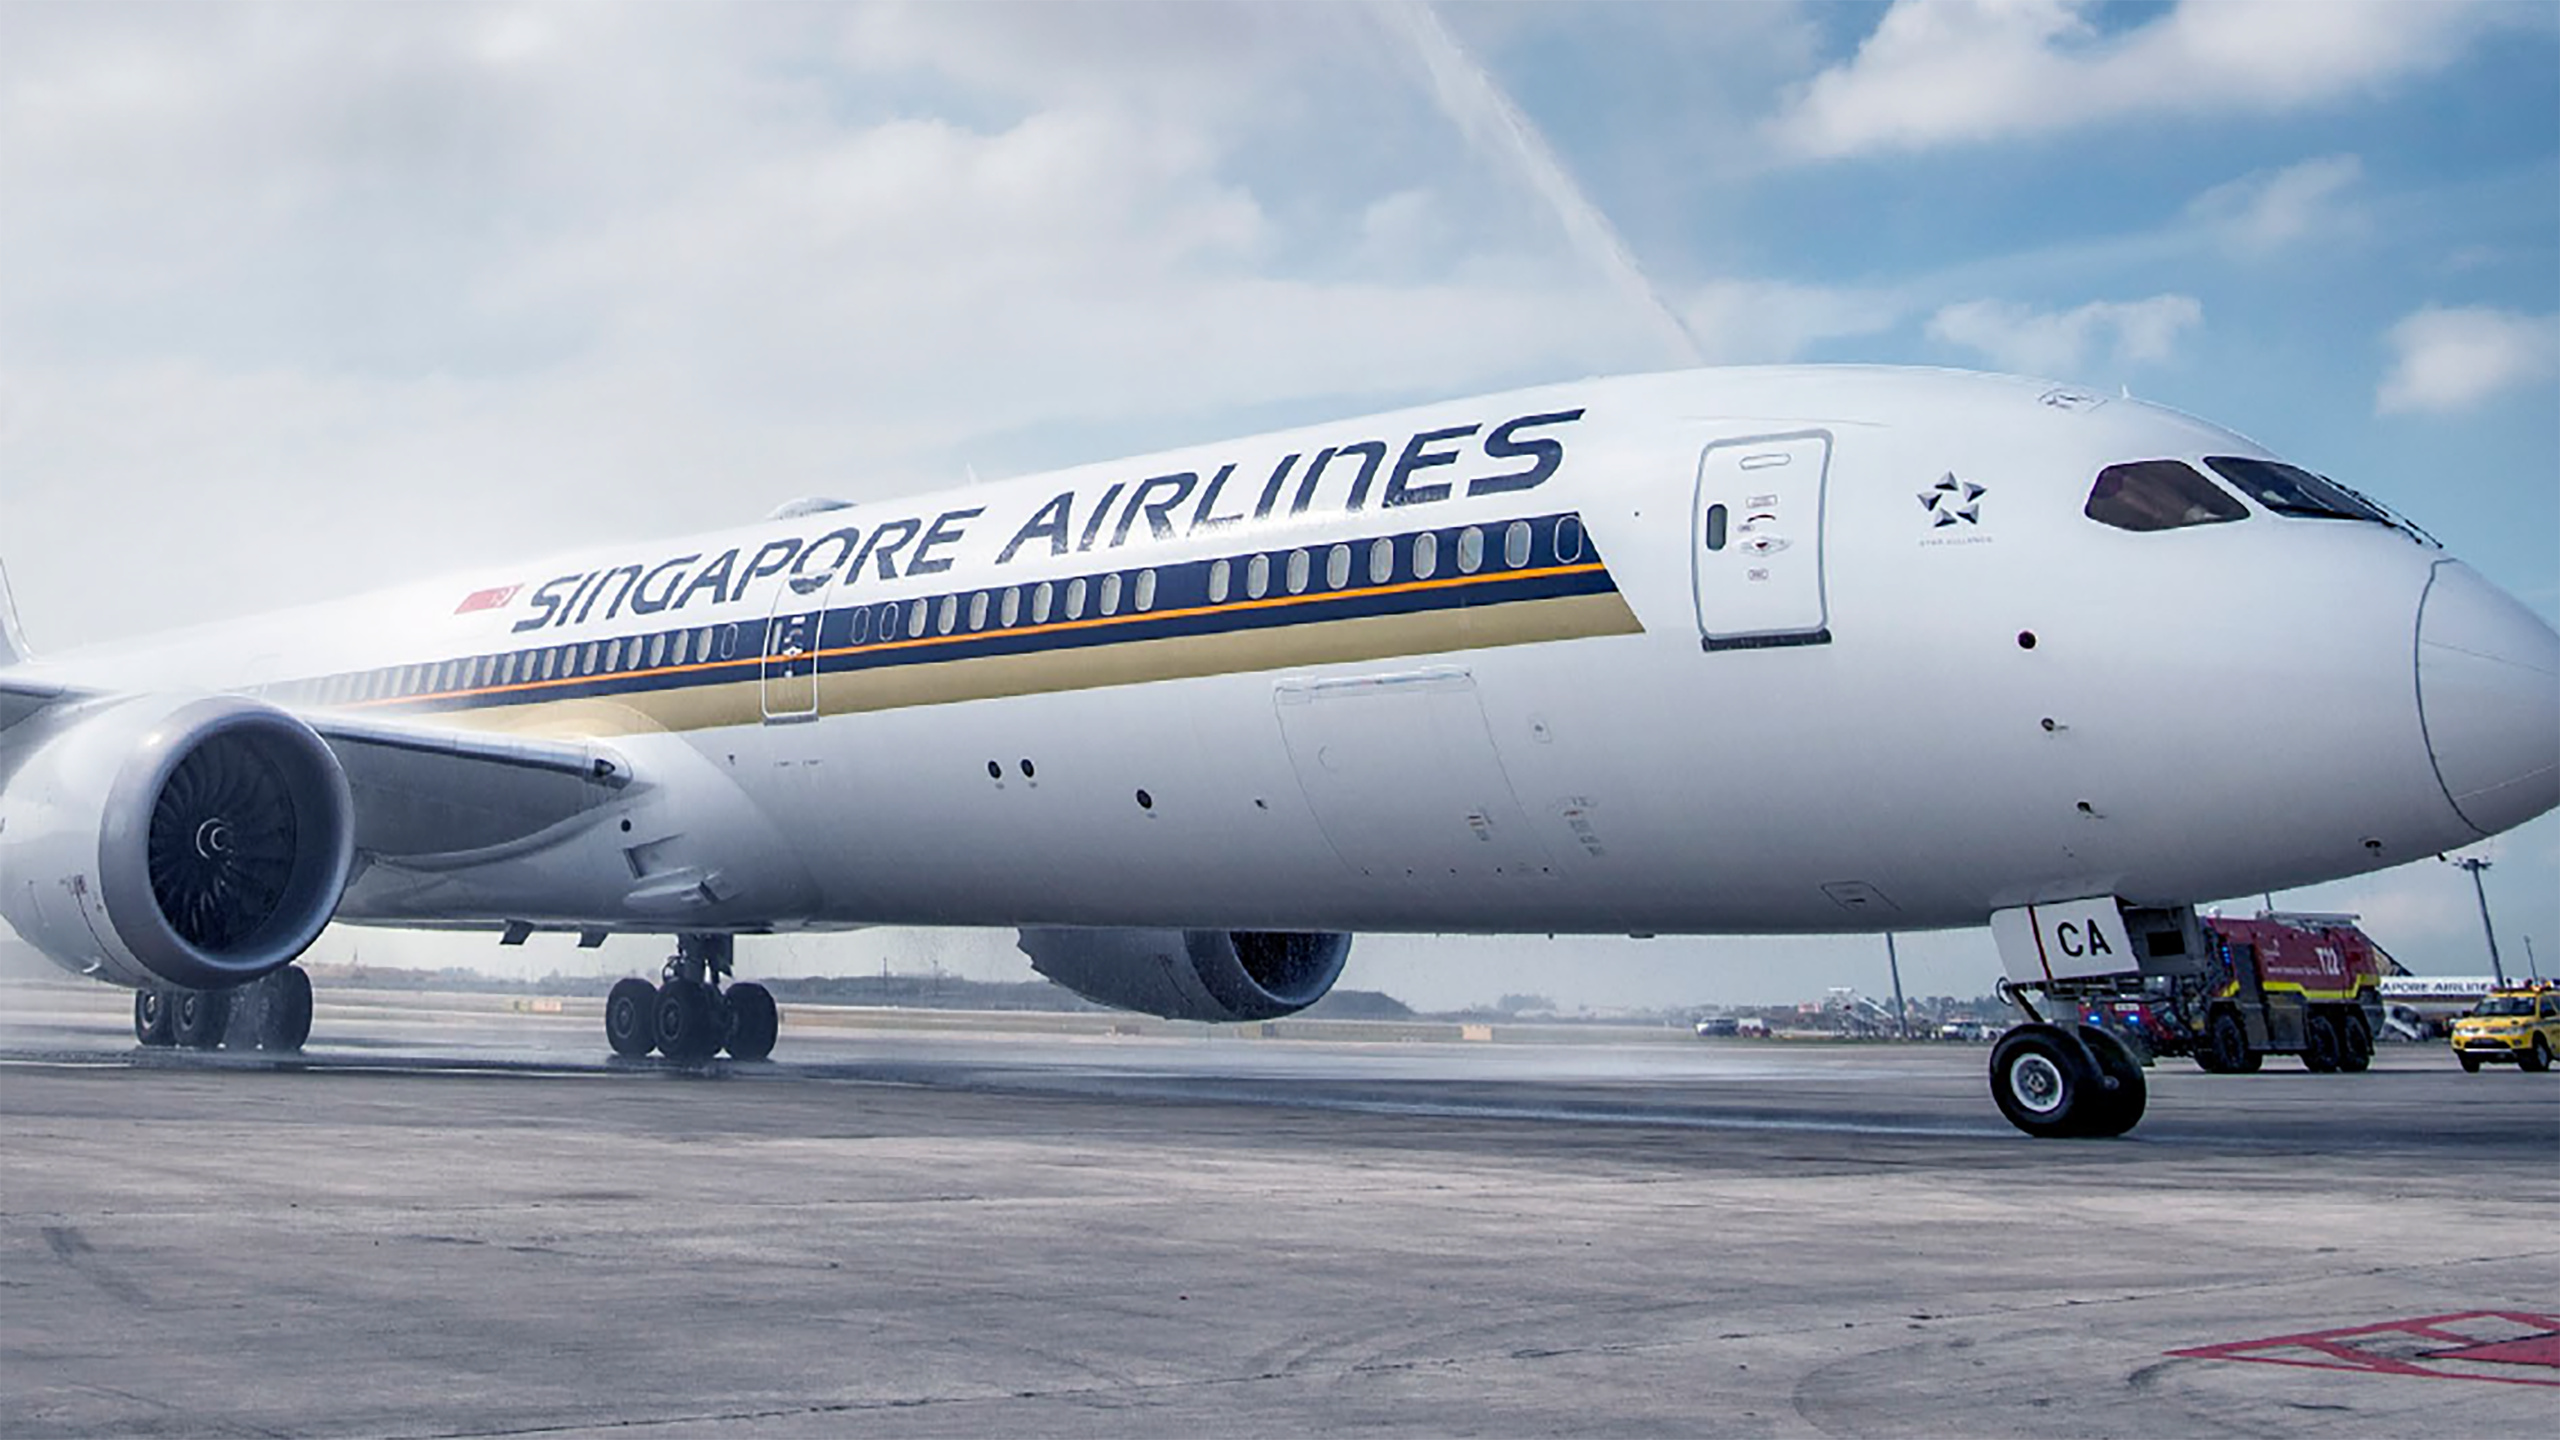 Singapore Airlines, Top free, Singapore airlines backgrounds, 2560x1440 HD Desktop